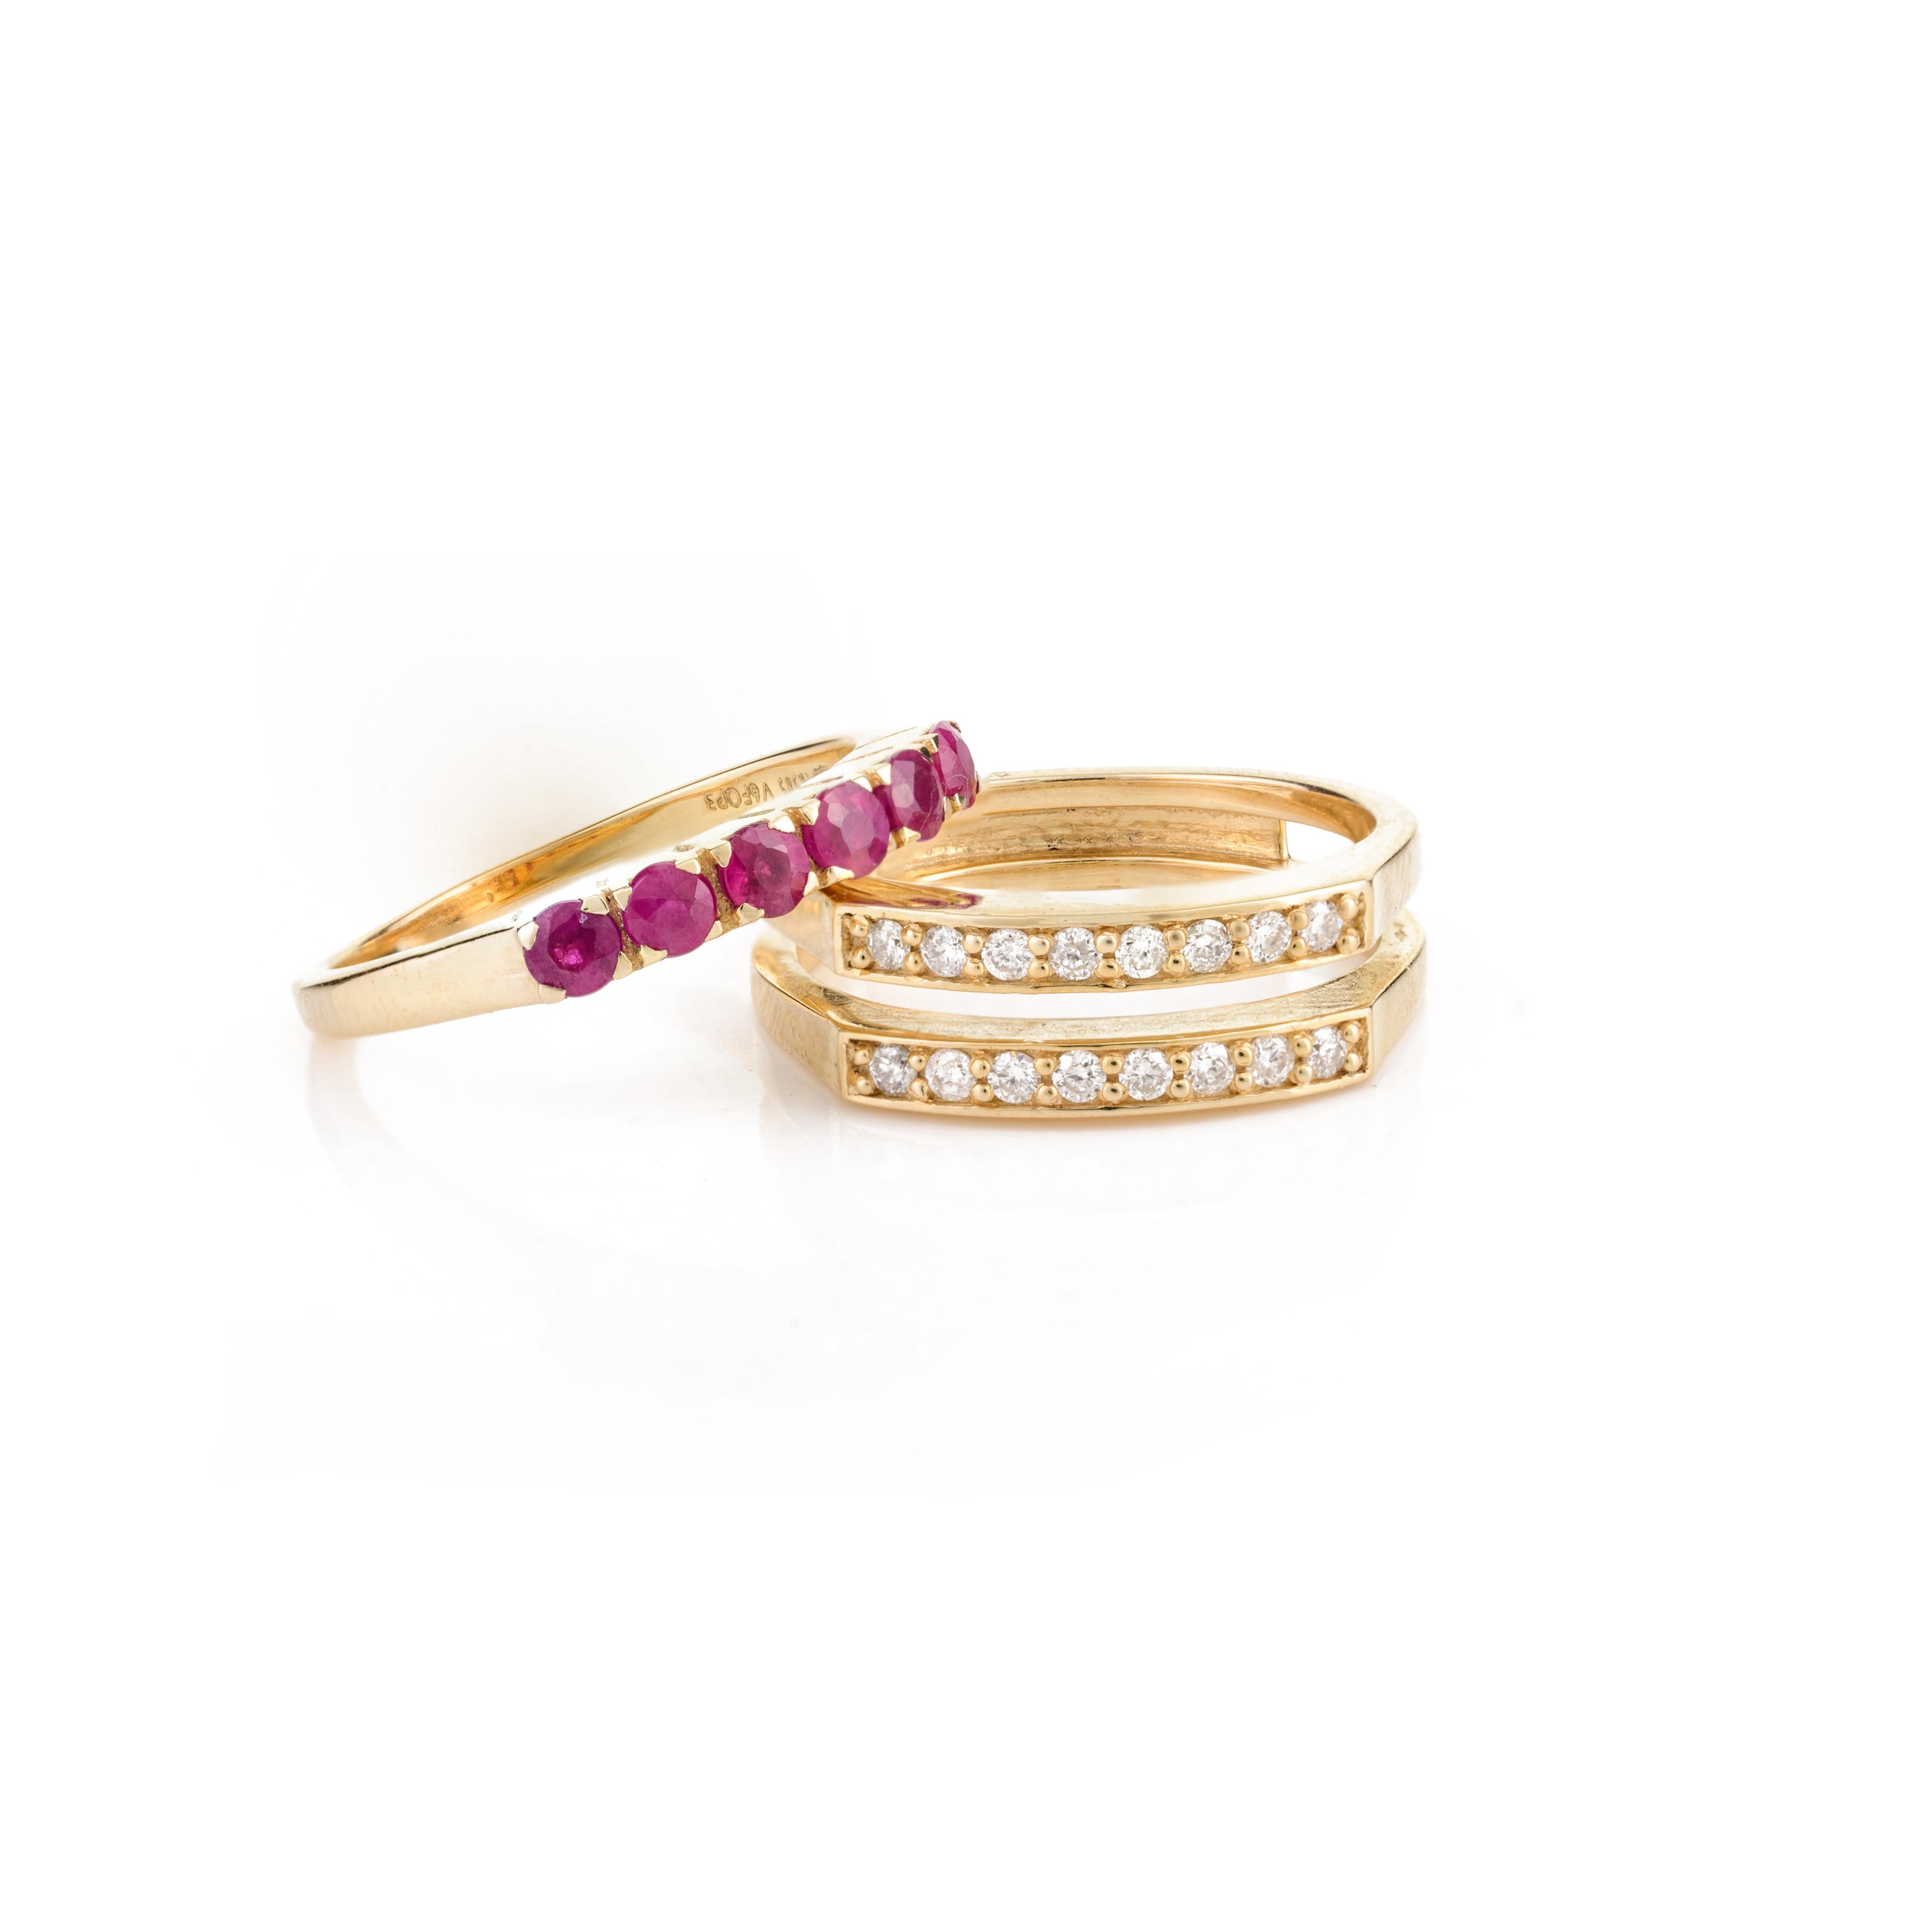 For Sale:  Unisex Two-in-One 14k Solid Yellow Gold Natural Ruby and Diamond Wedding Ring 7